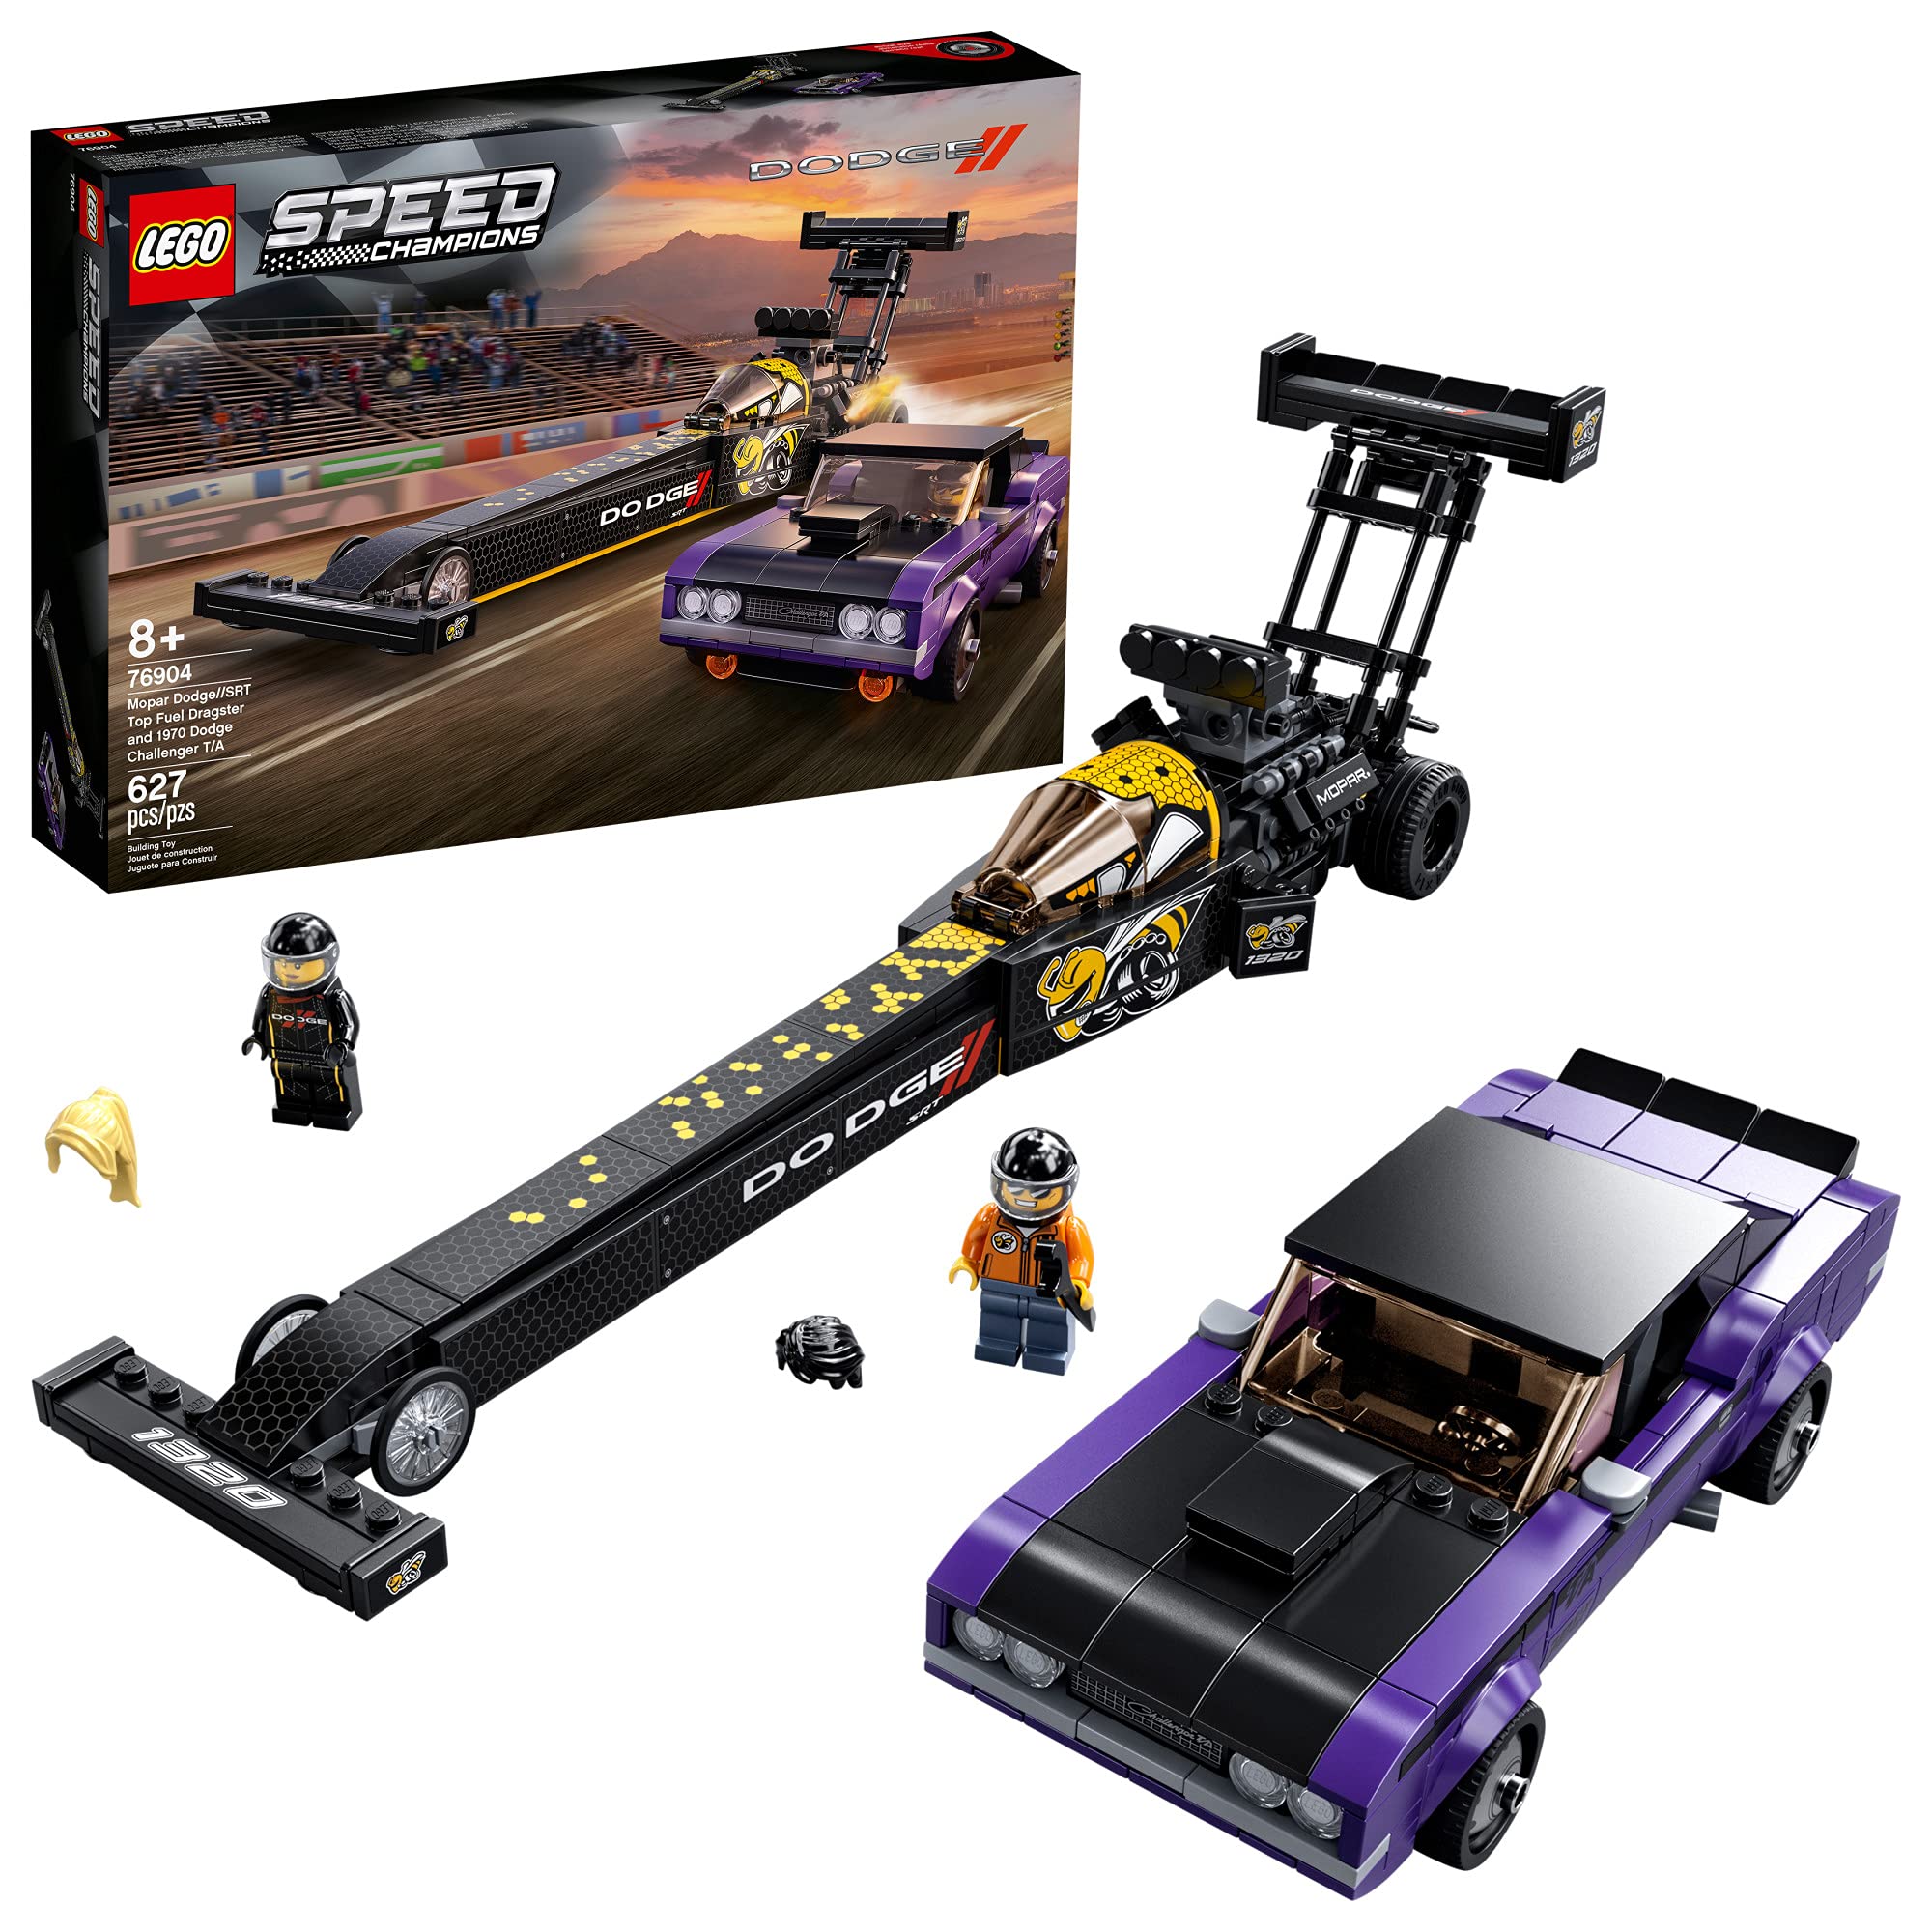 LEGO Speed Champions Mopar Dodge//SRT Top Fuel Dragster and 1970 Dodge Challenger T/A 76904 Building Toy; New 2021 (627 Pieces) (Open Box, Like New)